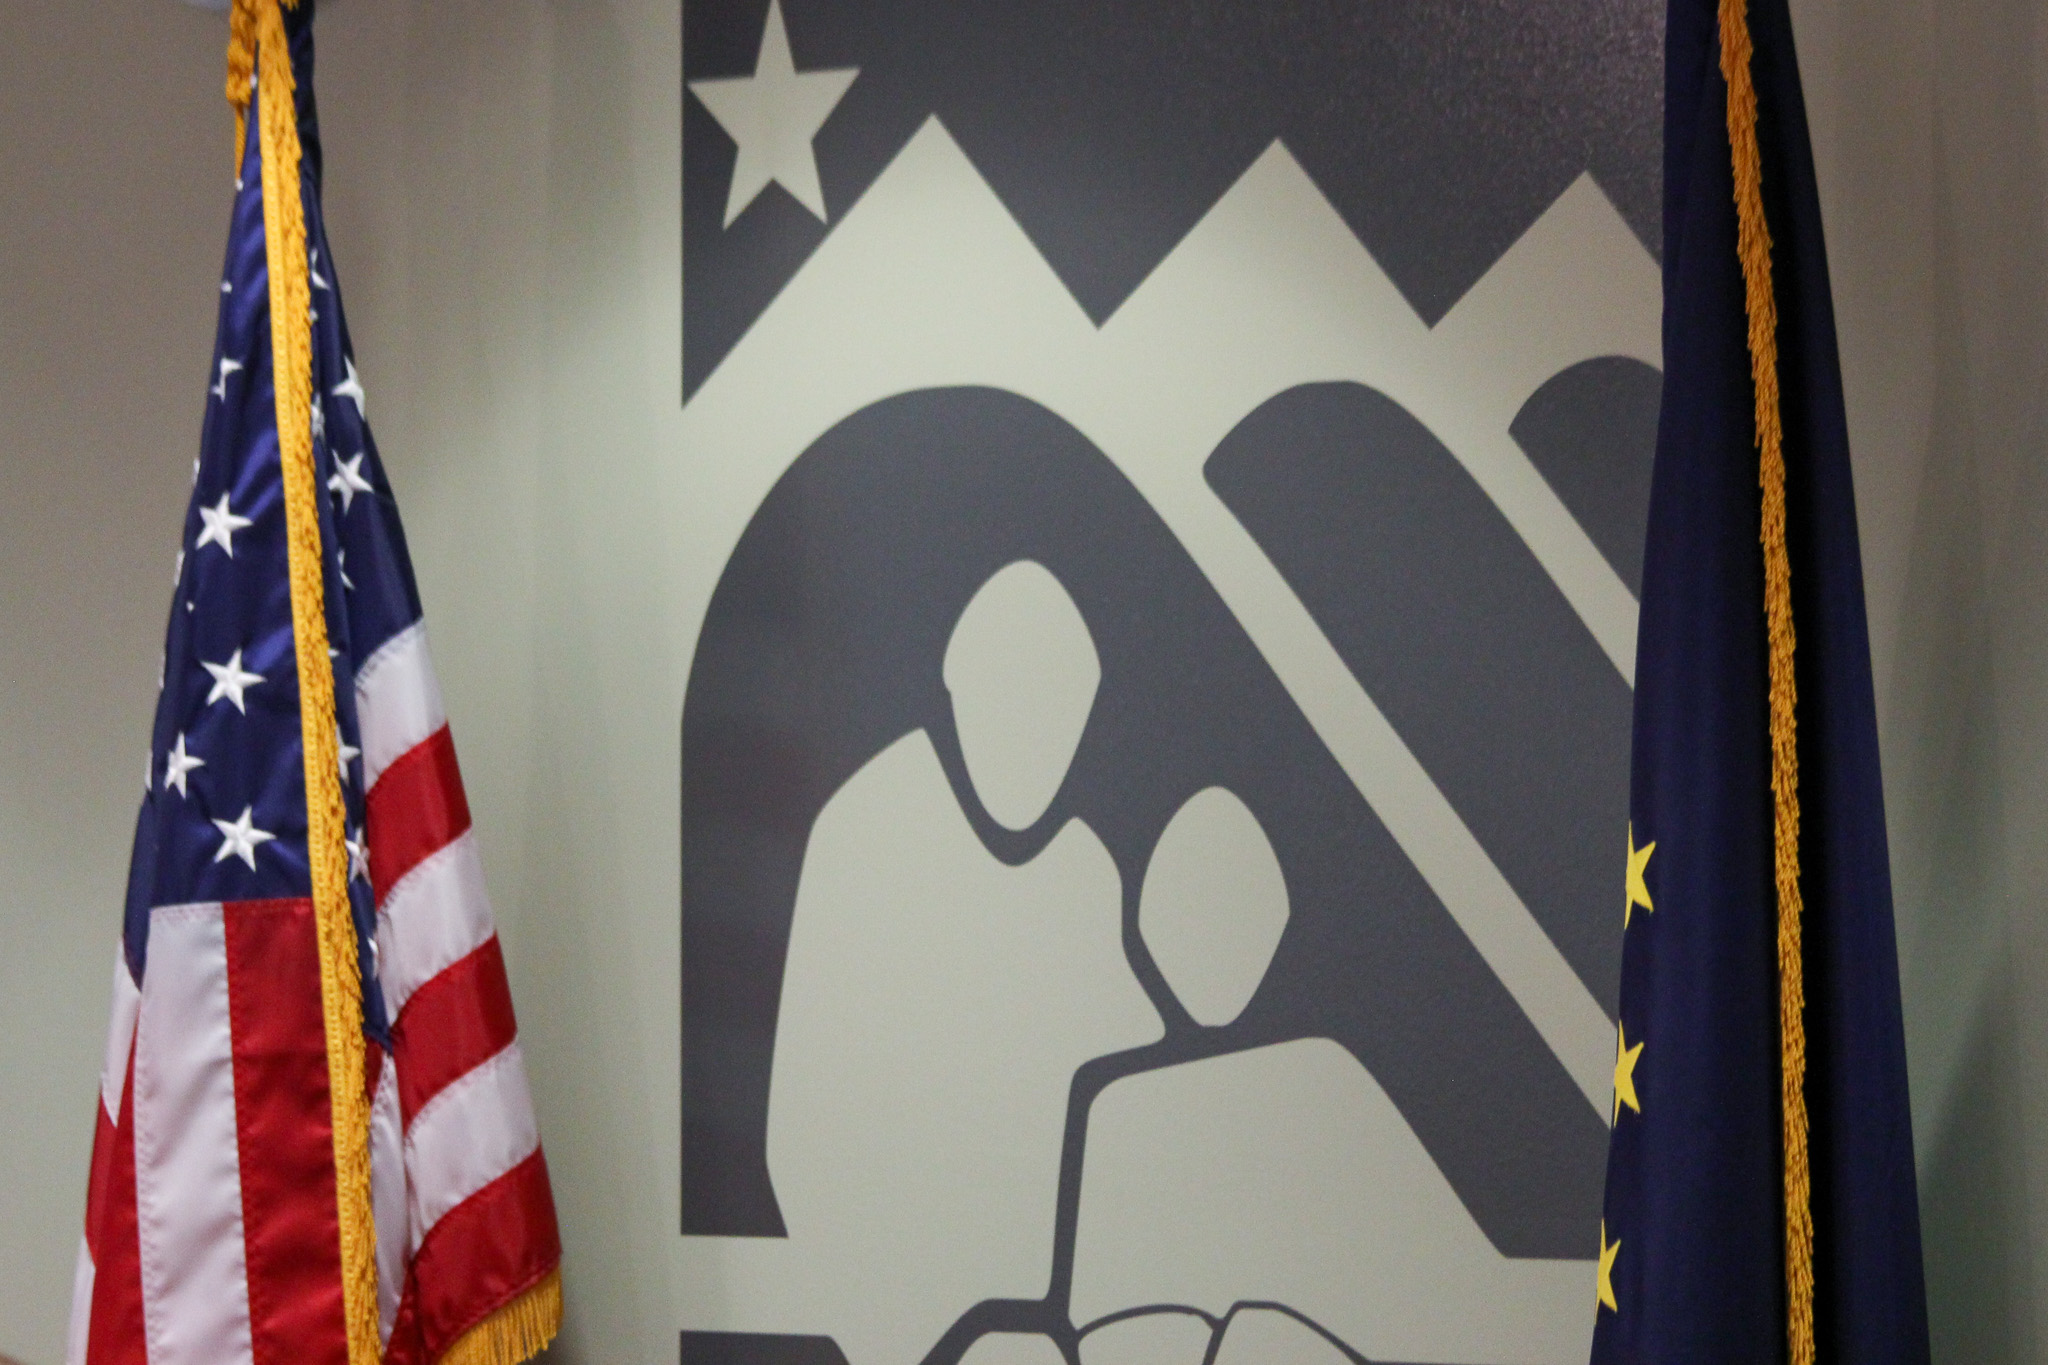 A logo is painted on a wall between the Alaskan and American flags.